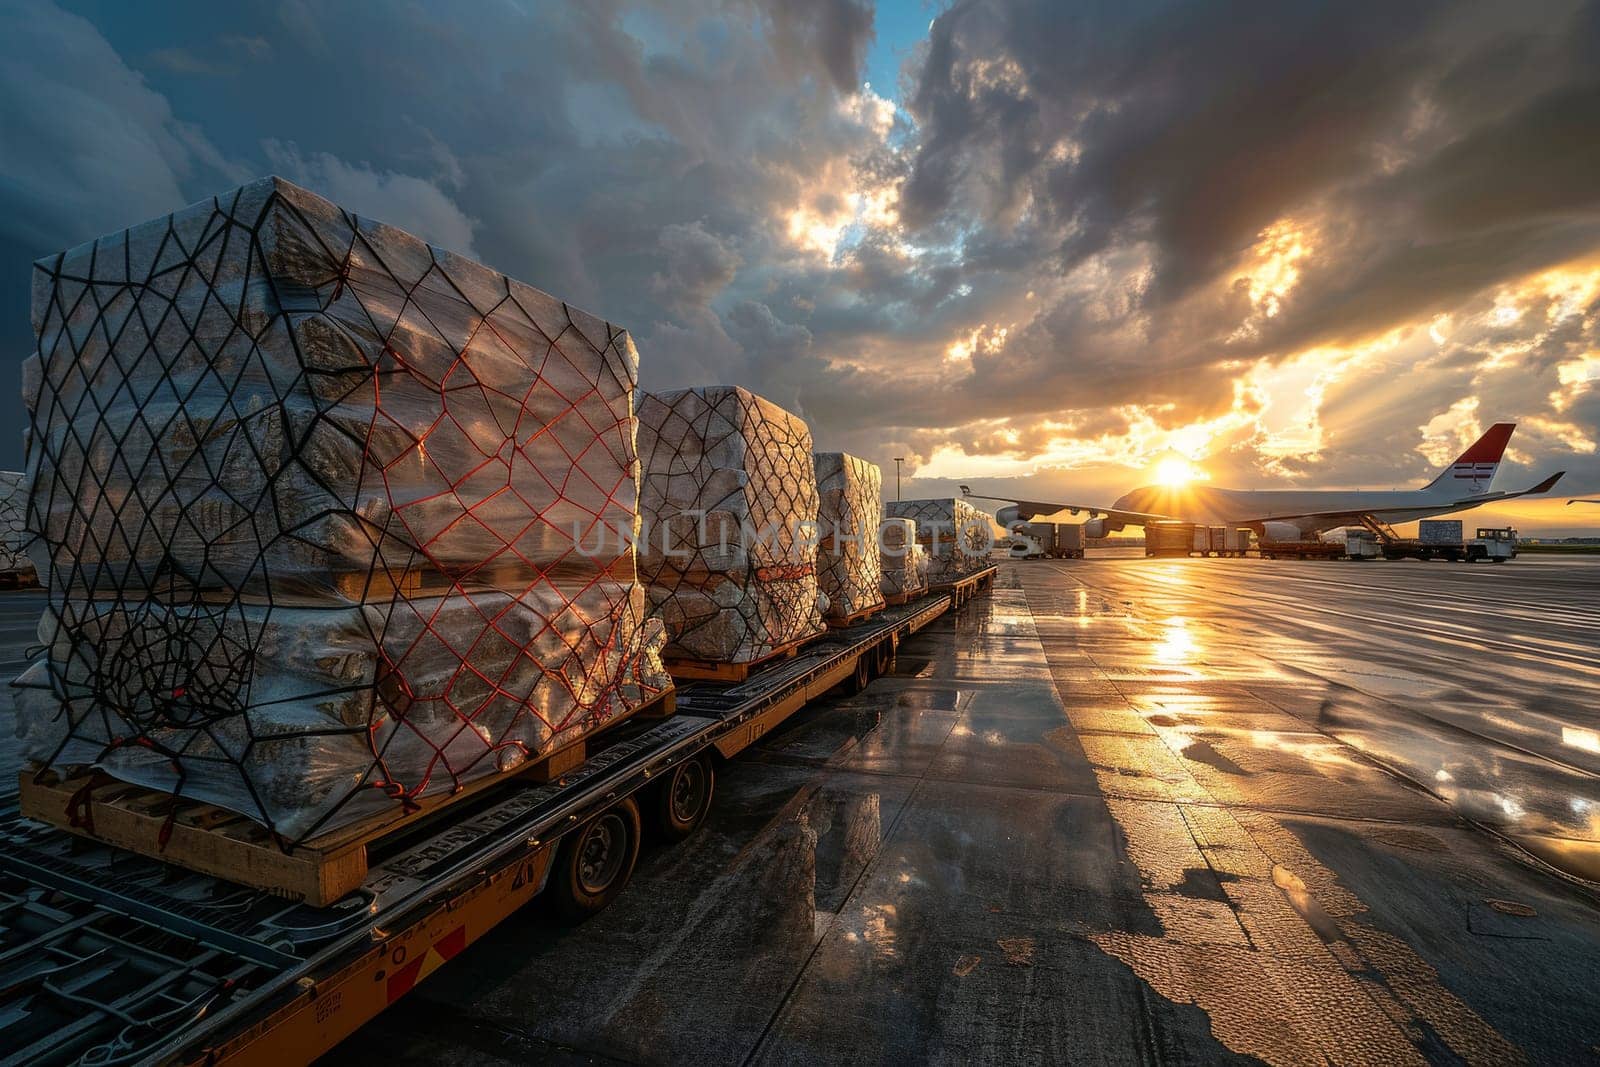 A large airplane is flying over a row of boxes. The boxes are stacked on pallets and are being loaded onto the plane. The scene is taking place at an airport, and the sun is setting in the background